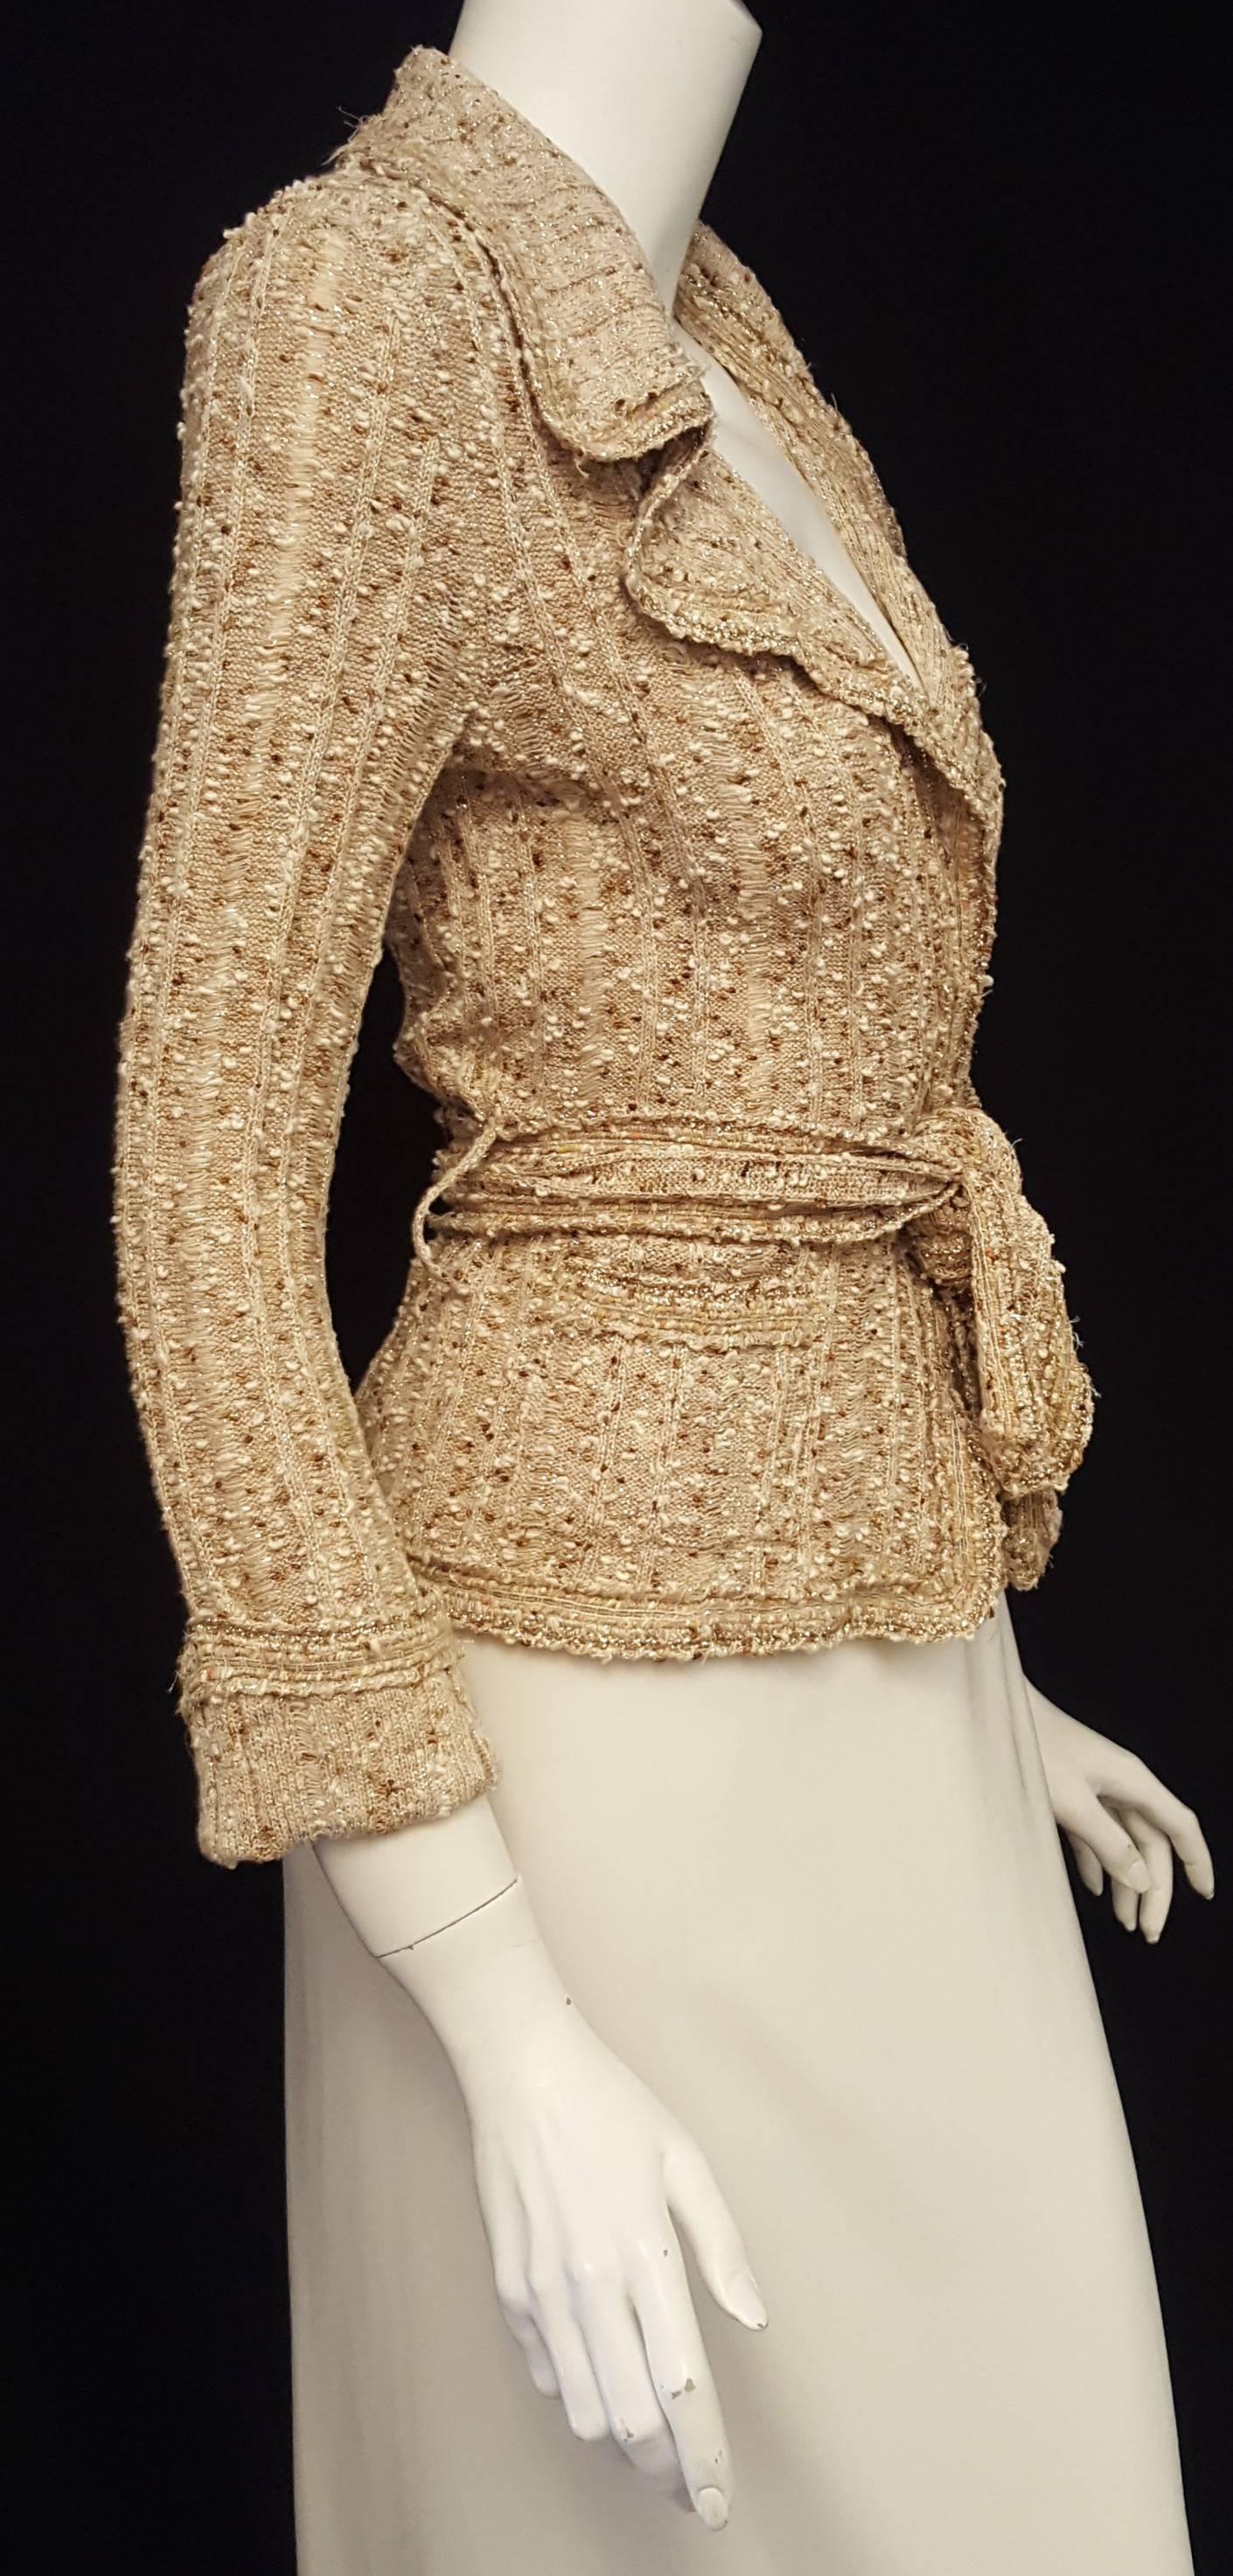 Women's Chanel Beige, Copper & Gold Tone Cotton Blend Knit Sweater Jacket from Spring 06